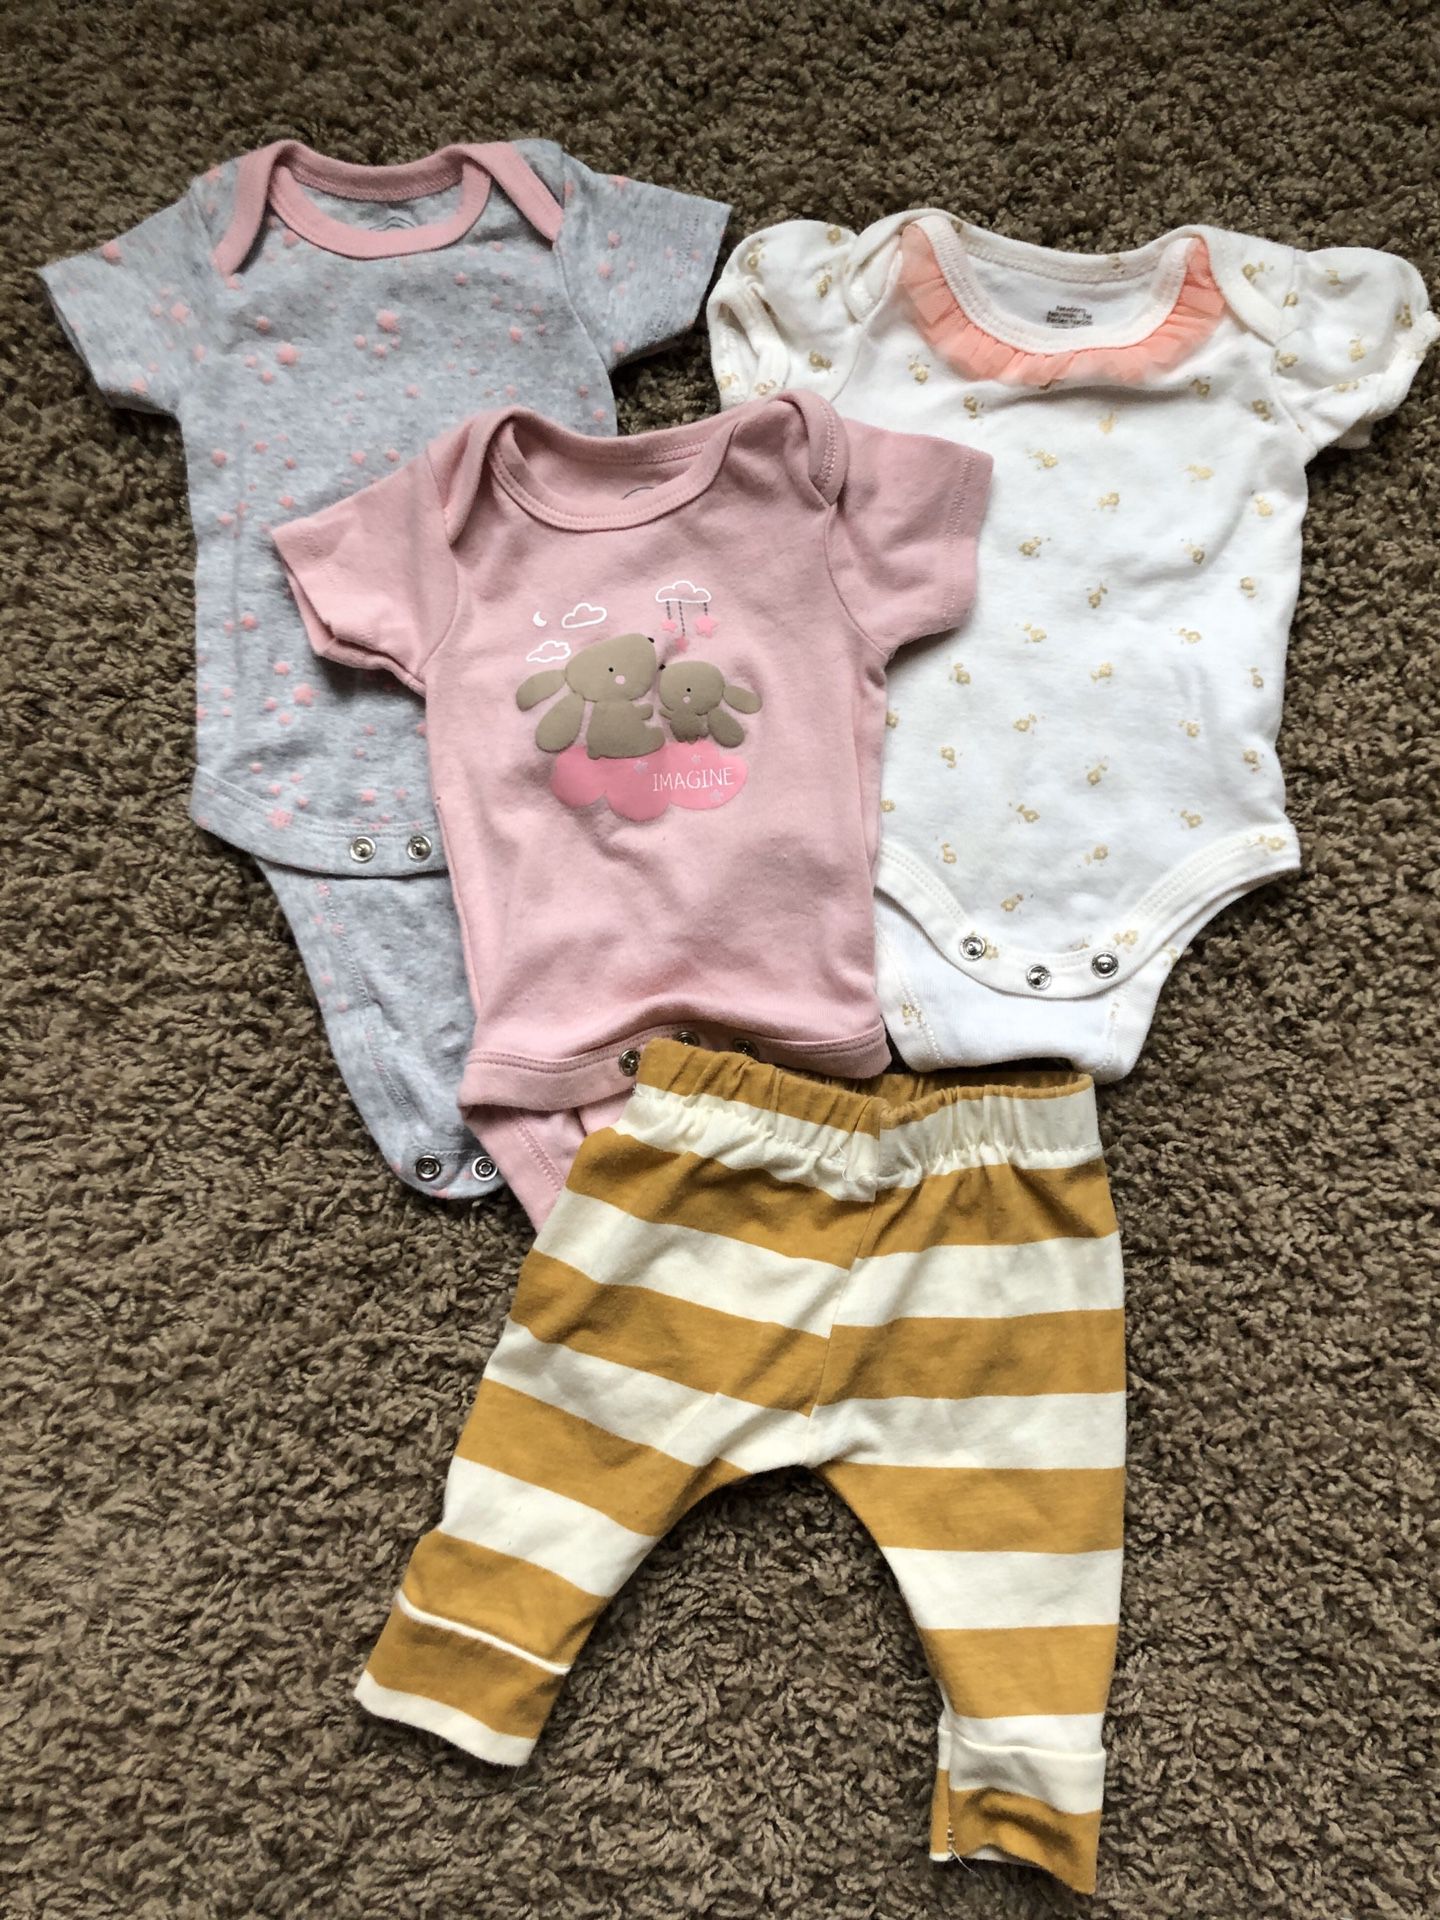 Baby clothes 45 outfits